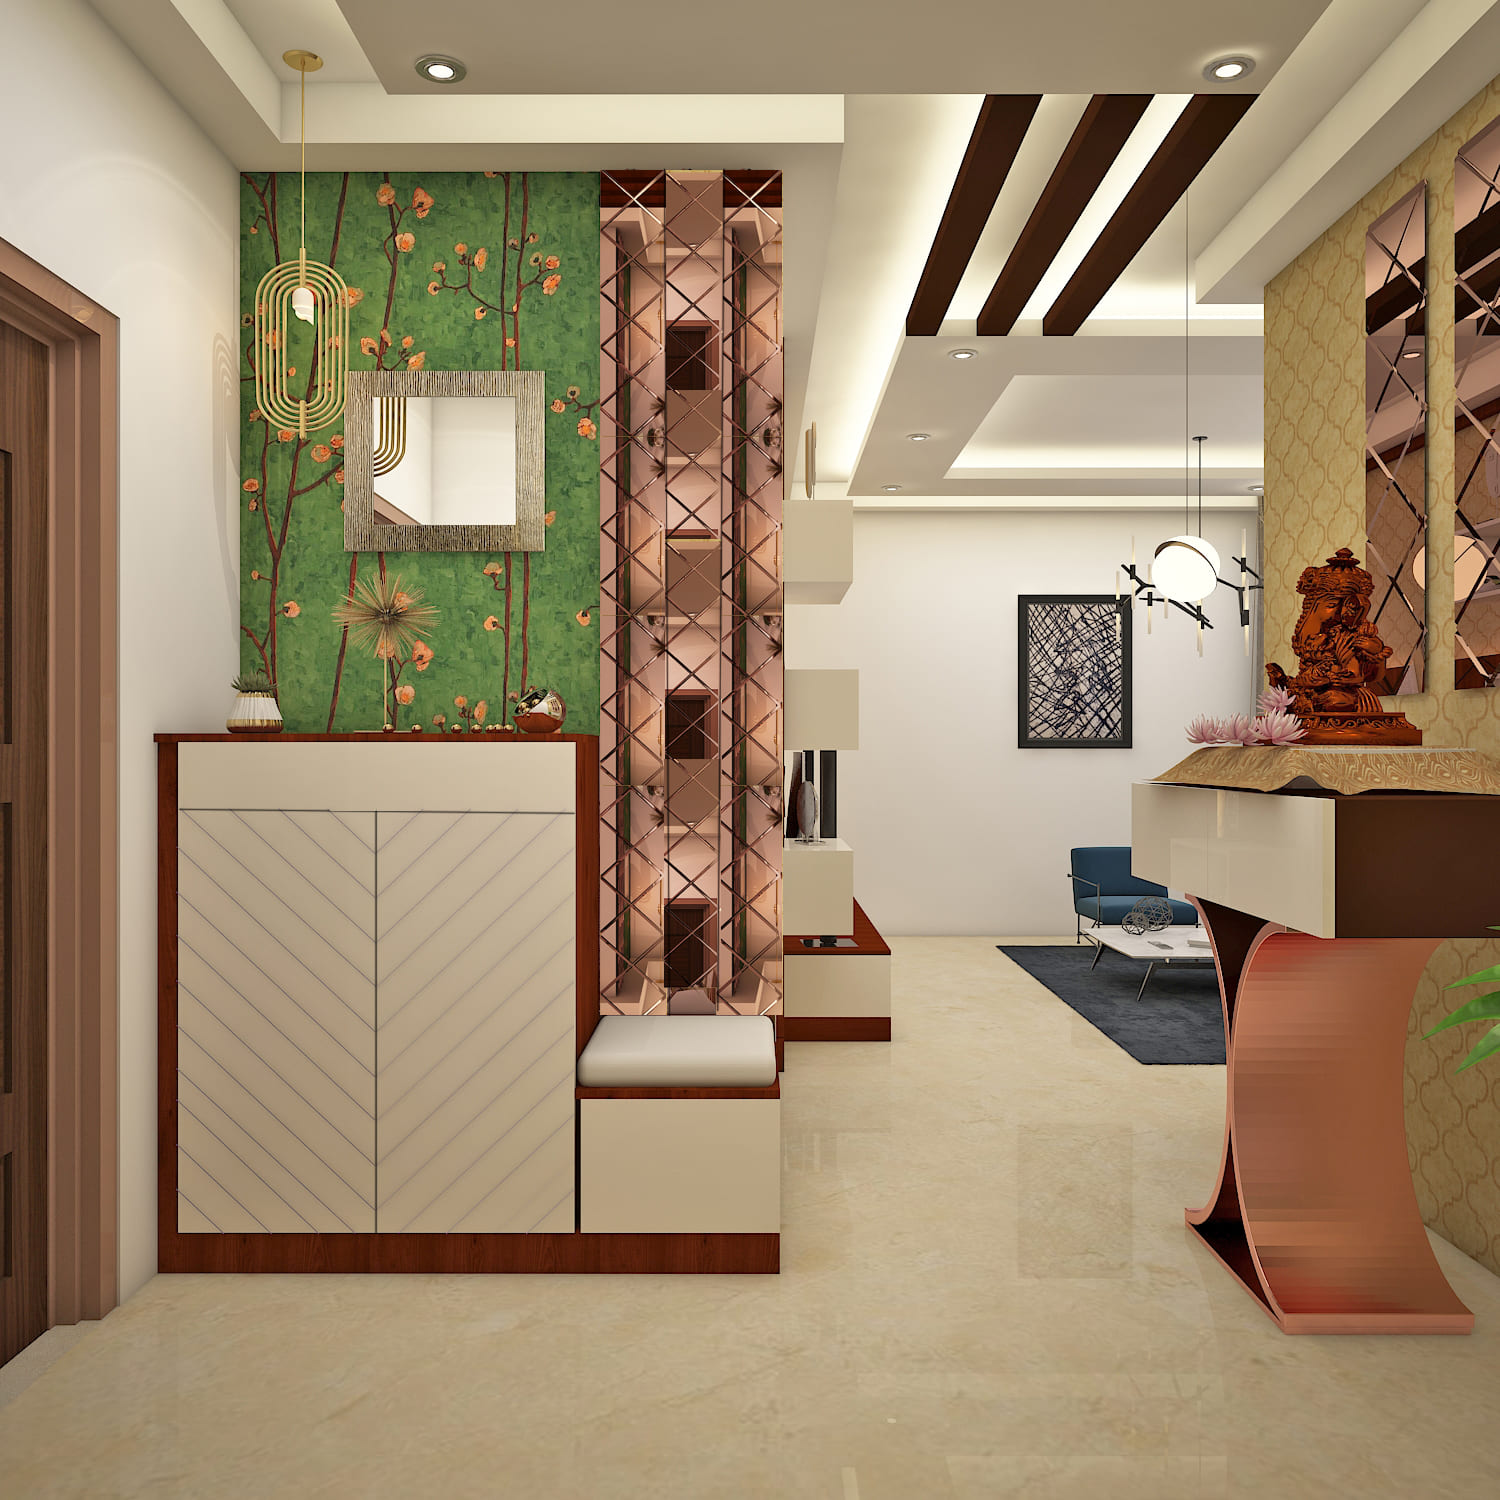 Best home interior designers in Bangalore - Classy Foyer Interior Design Ideas for your home entrance